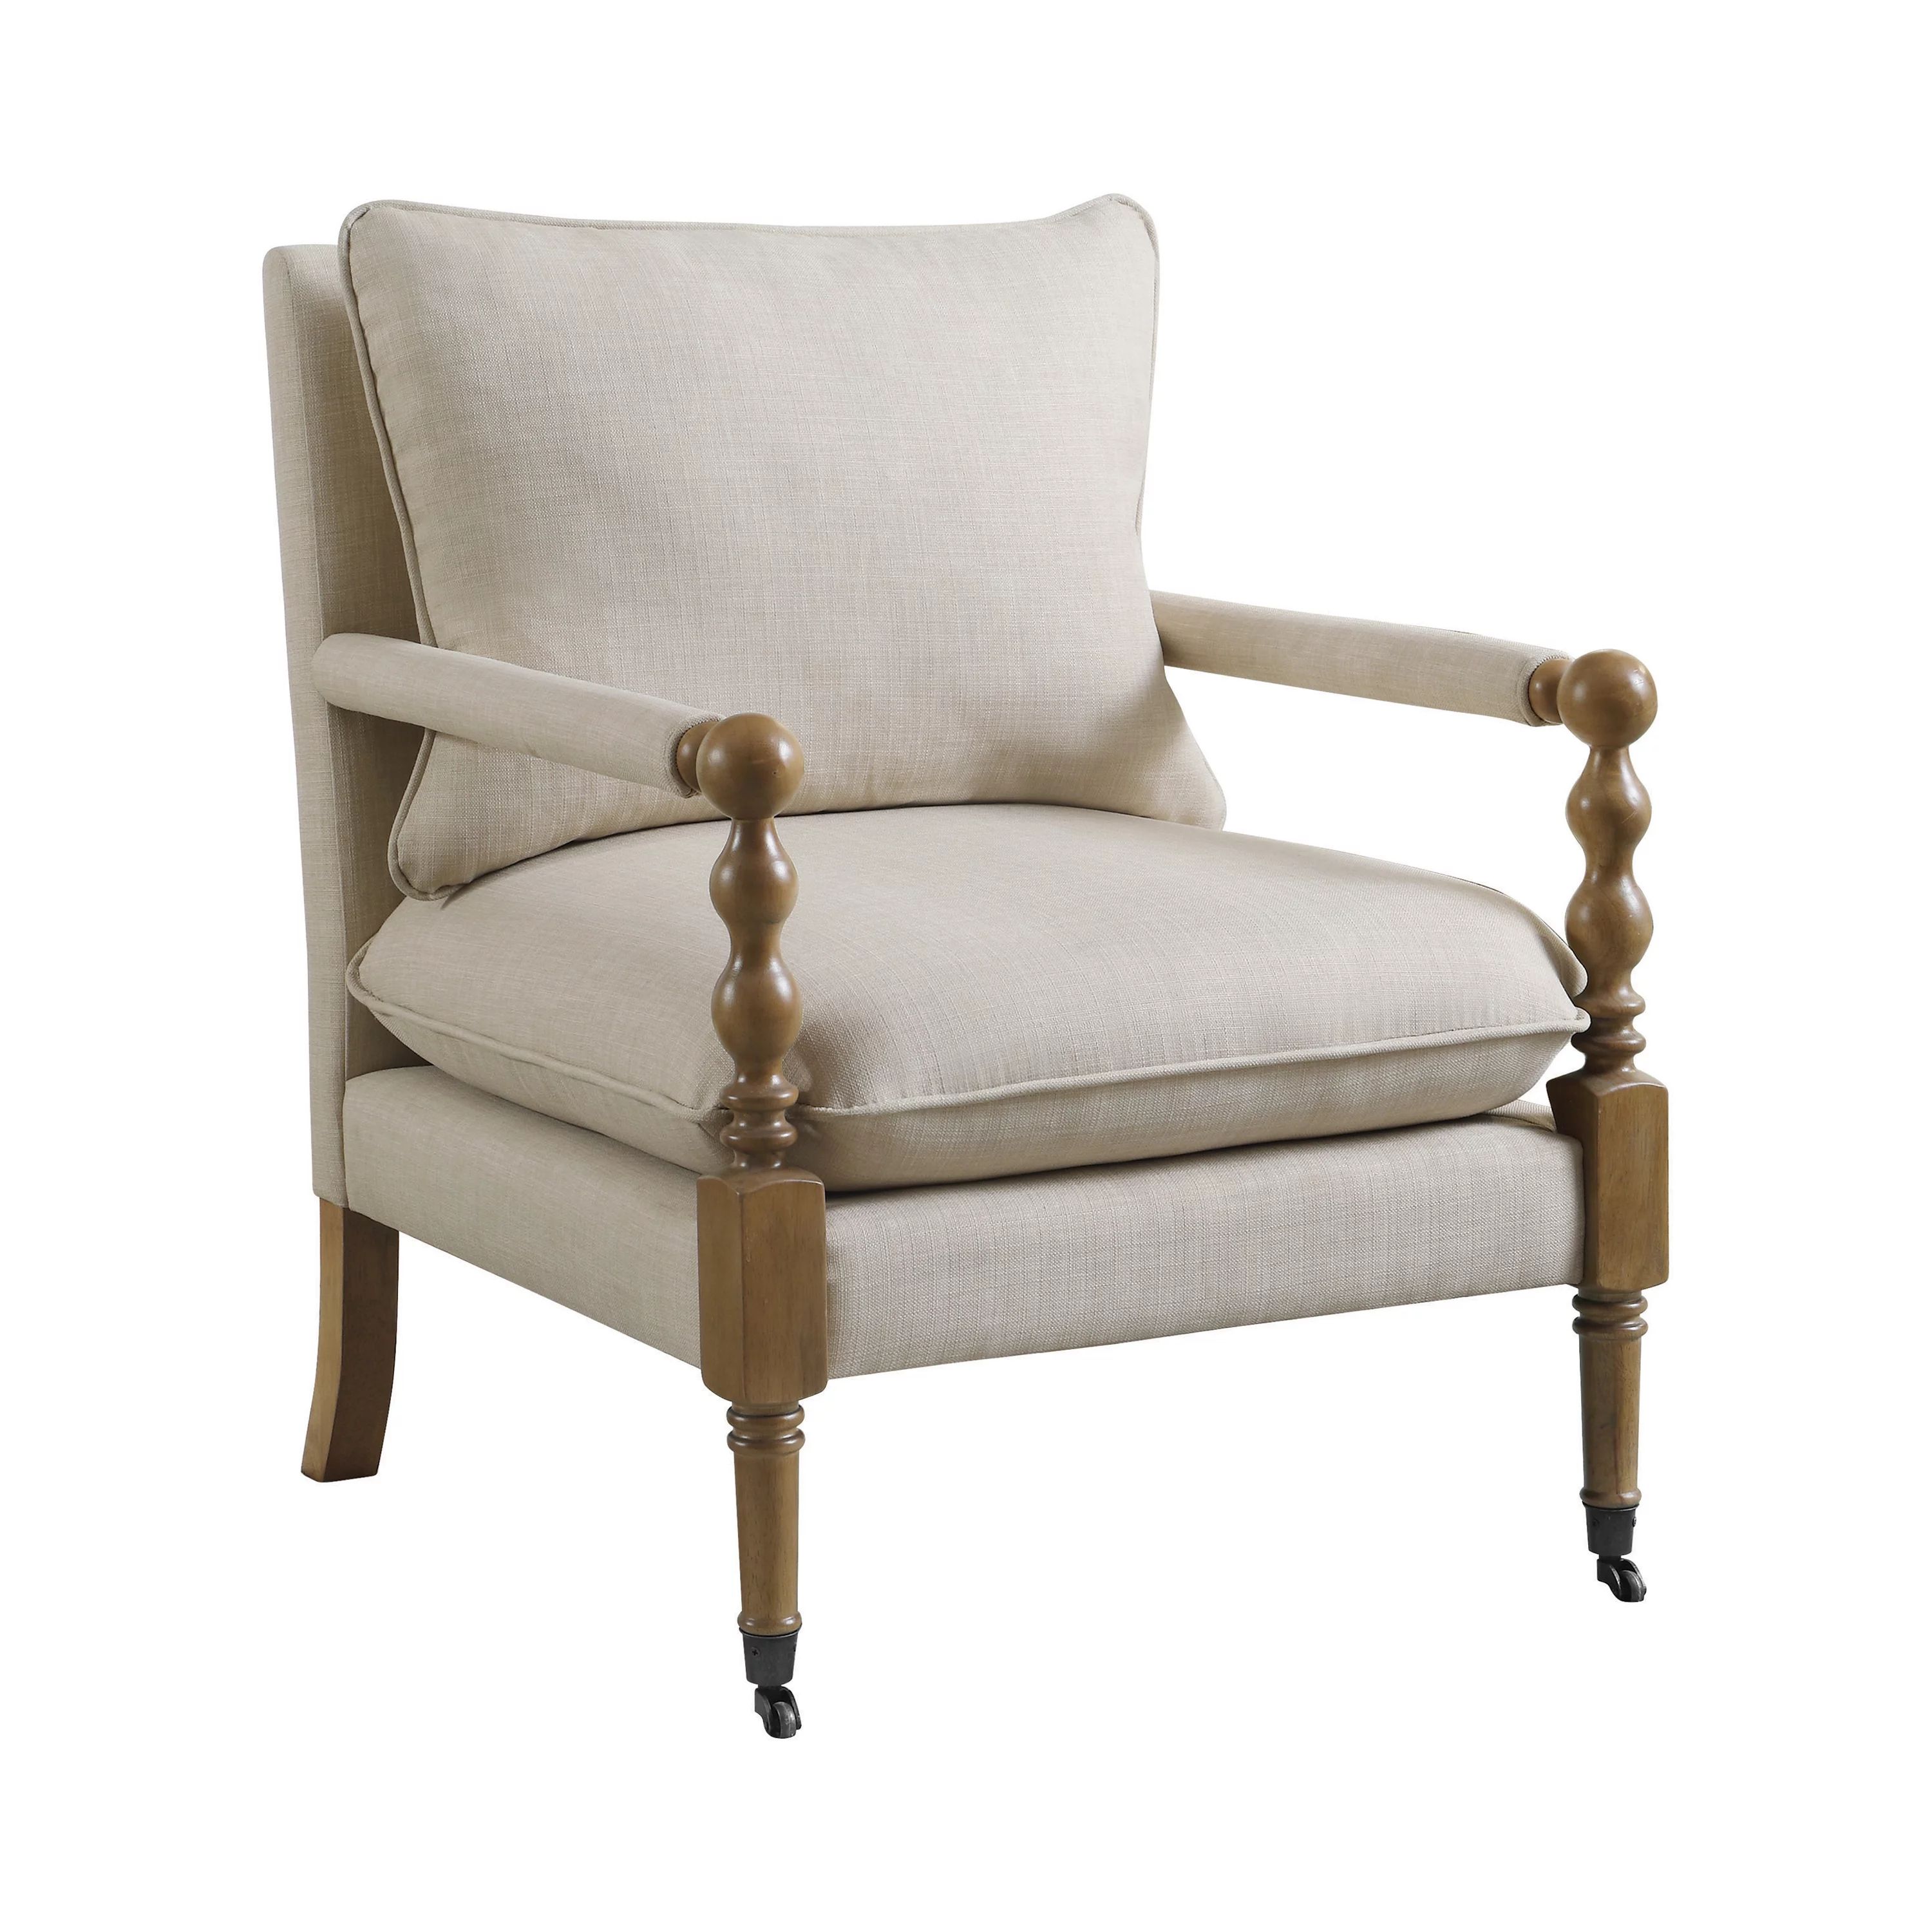 Upholstered Accent Chair with Casters Beige | Walmart (US)